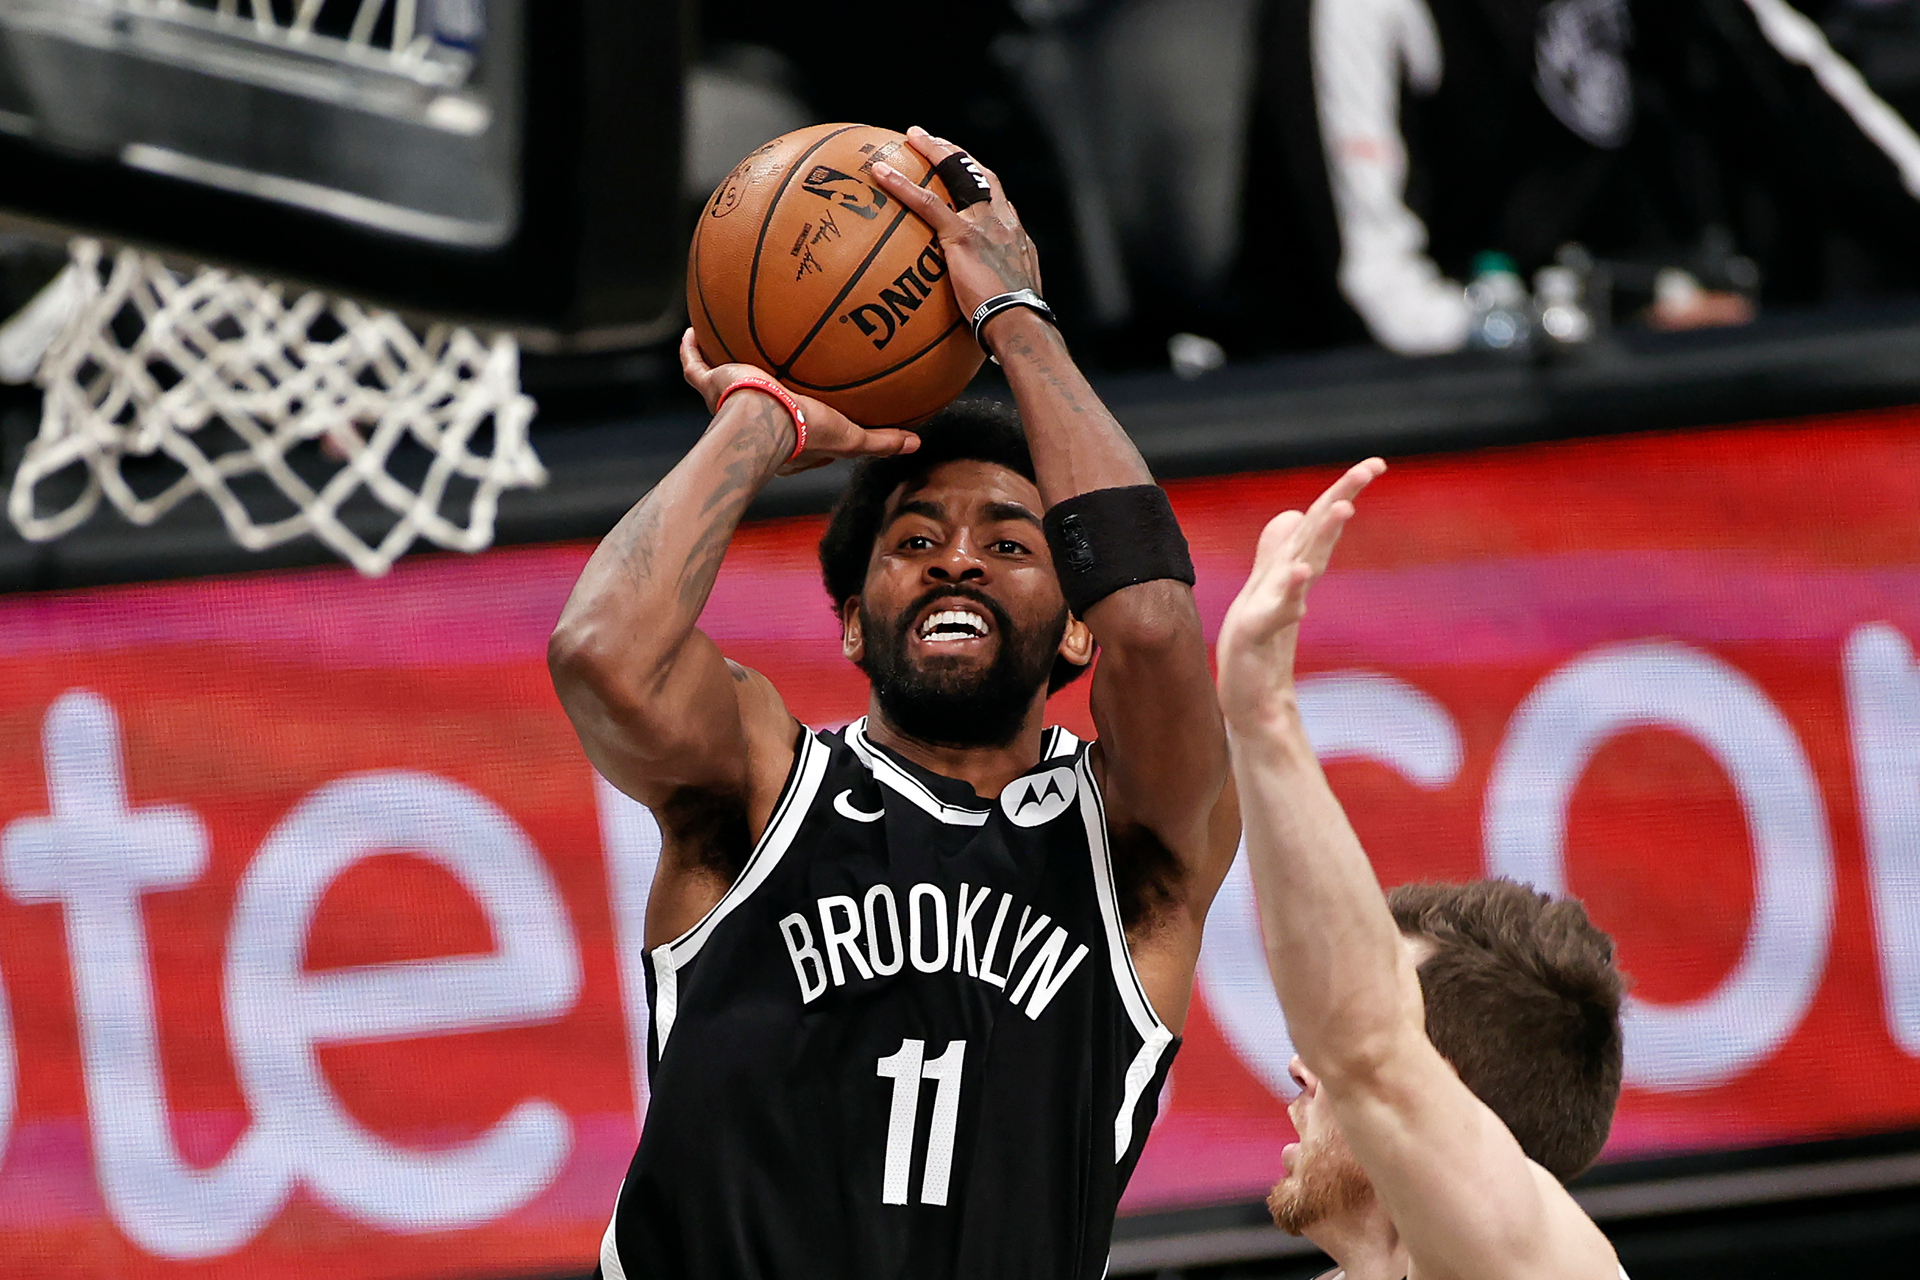 Basketball: Kyrie Irving faces losing $500,000 a game if he doesn't get  Covid-19 vaccination - NZ Herald